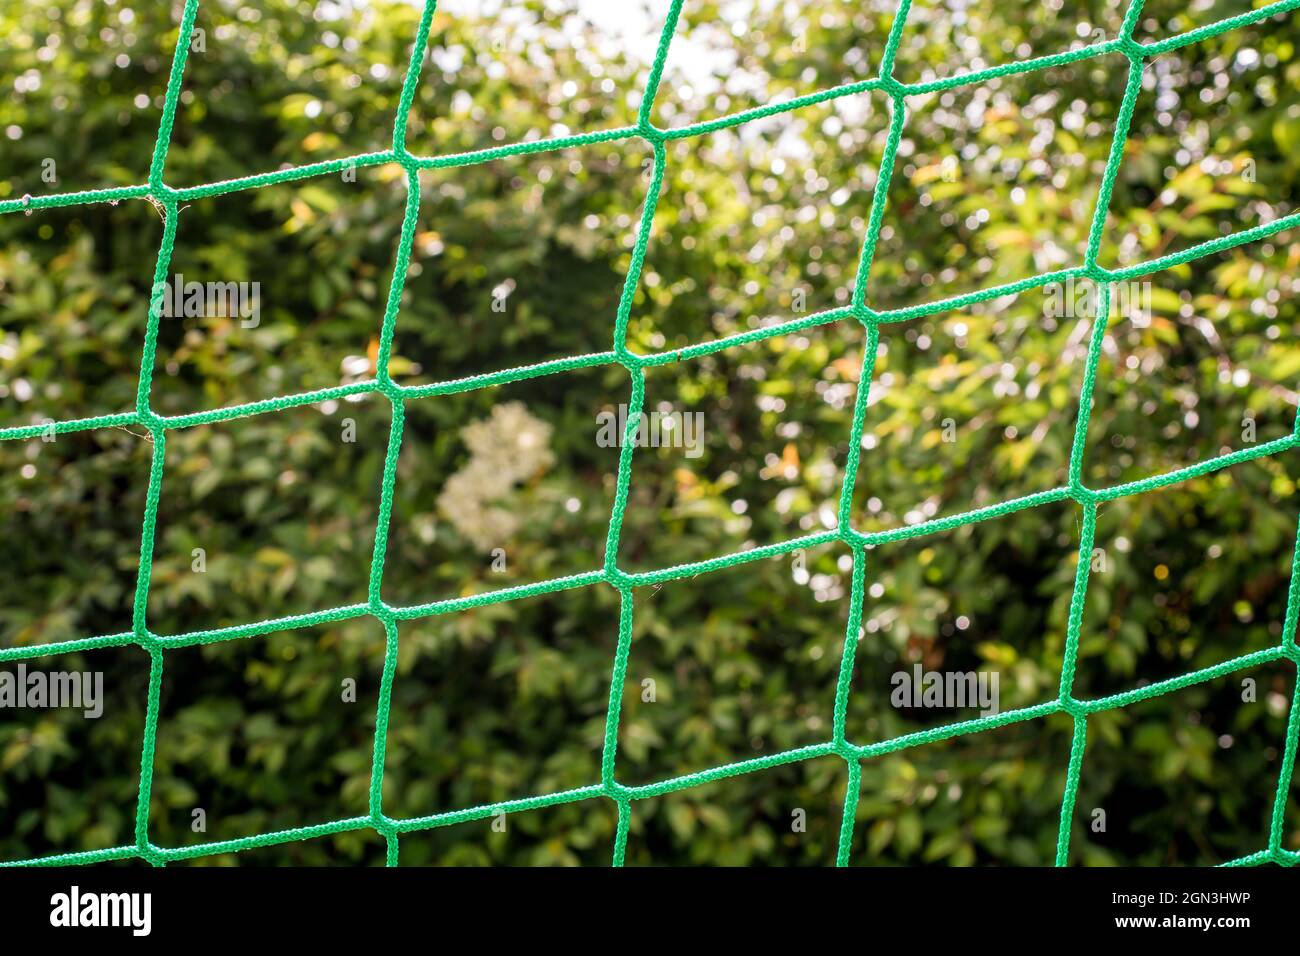 Mesh from the net of a soccer goal with green background Stock Photo